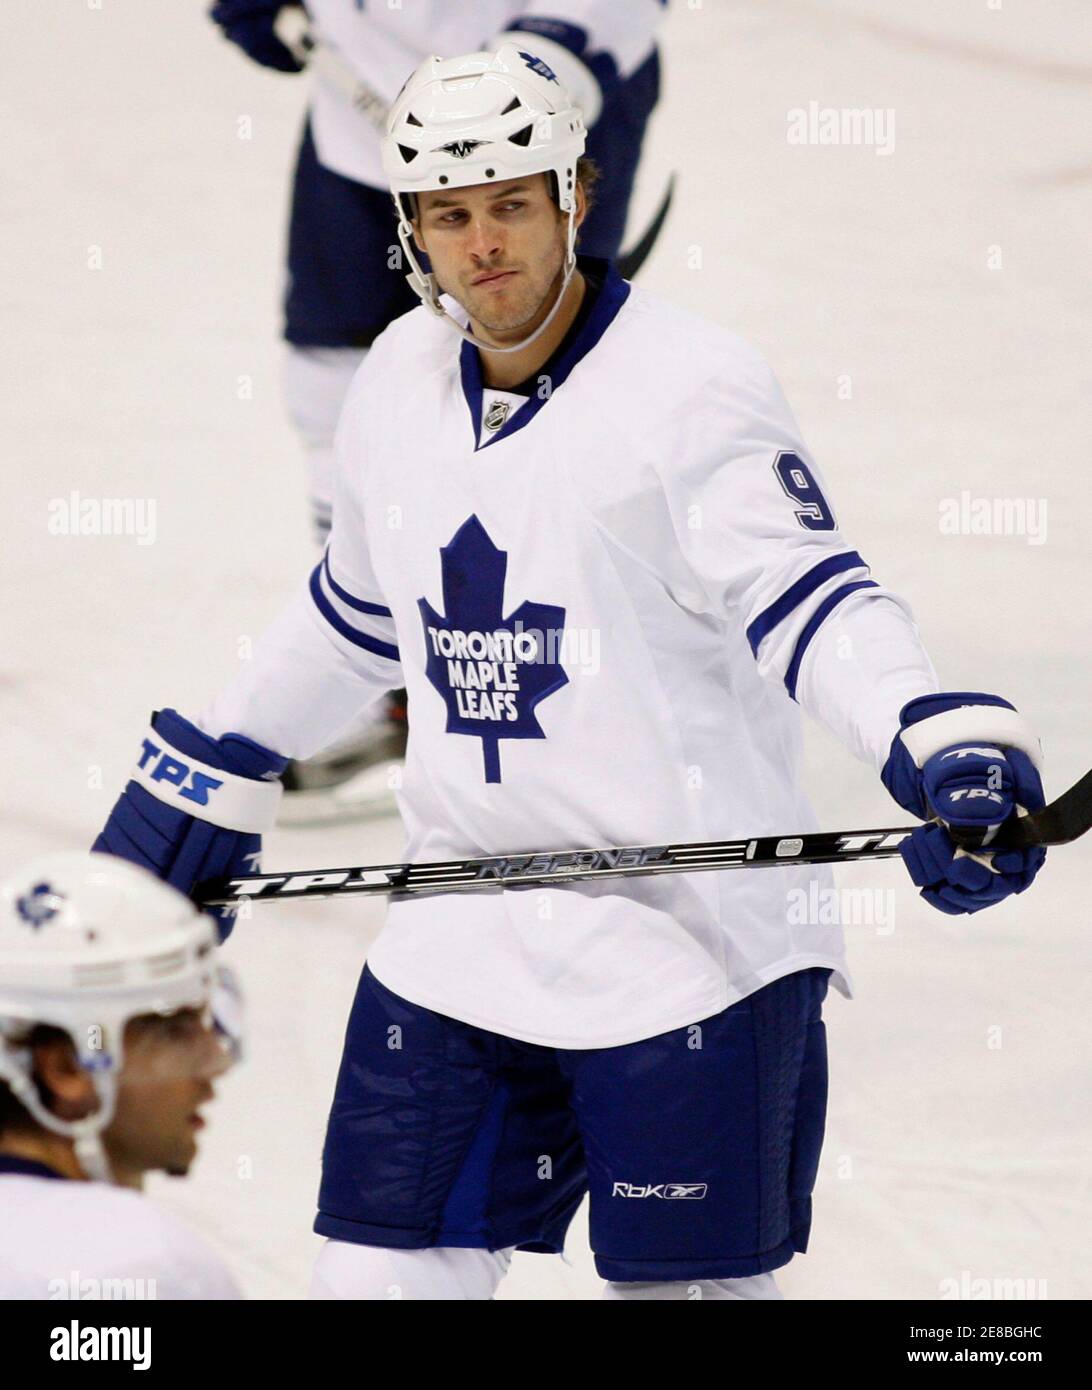 Toronto Maple Leafs' Mark Bell waits to face-off against the Ottawa Senators during the second period of their NHL hockey game in Ottawa November 6, 2007.        REUTERS/Chris Wattie   (CANADA) Stock Photo